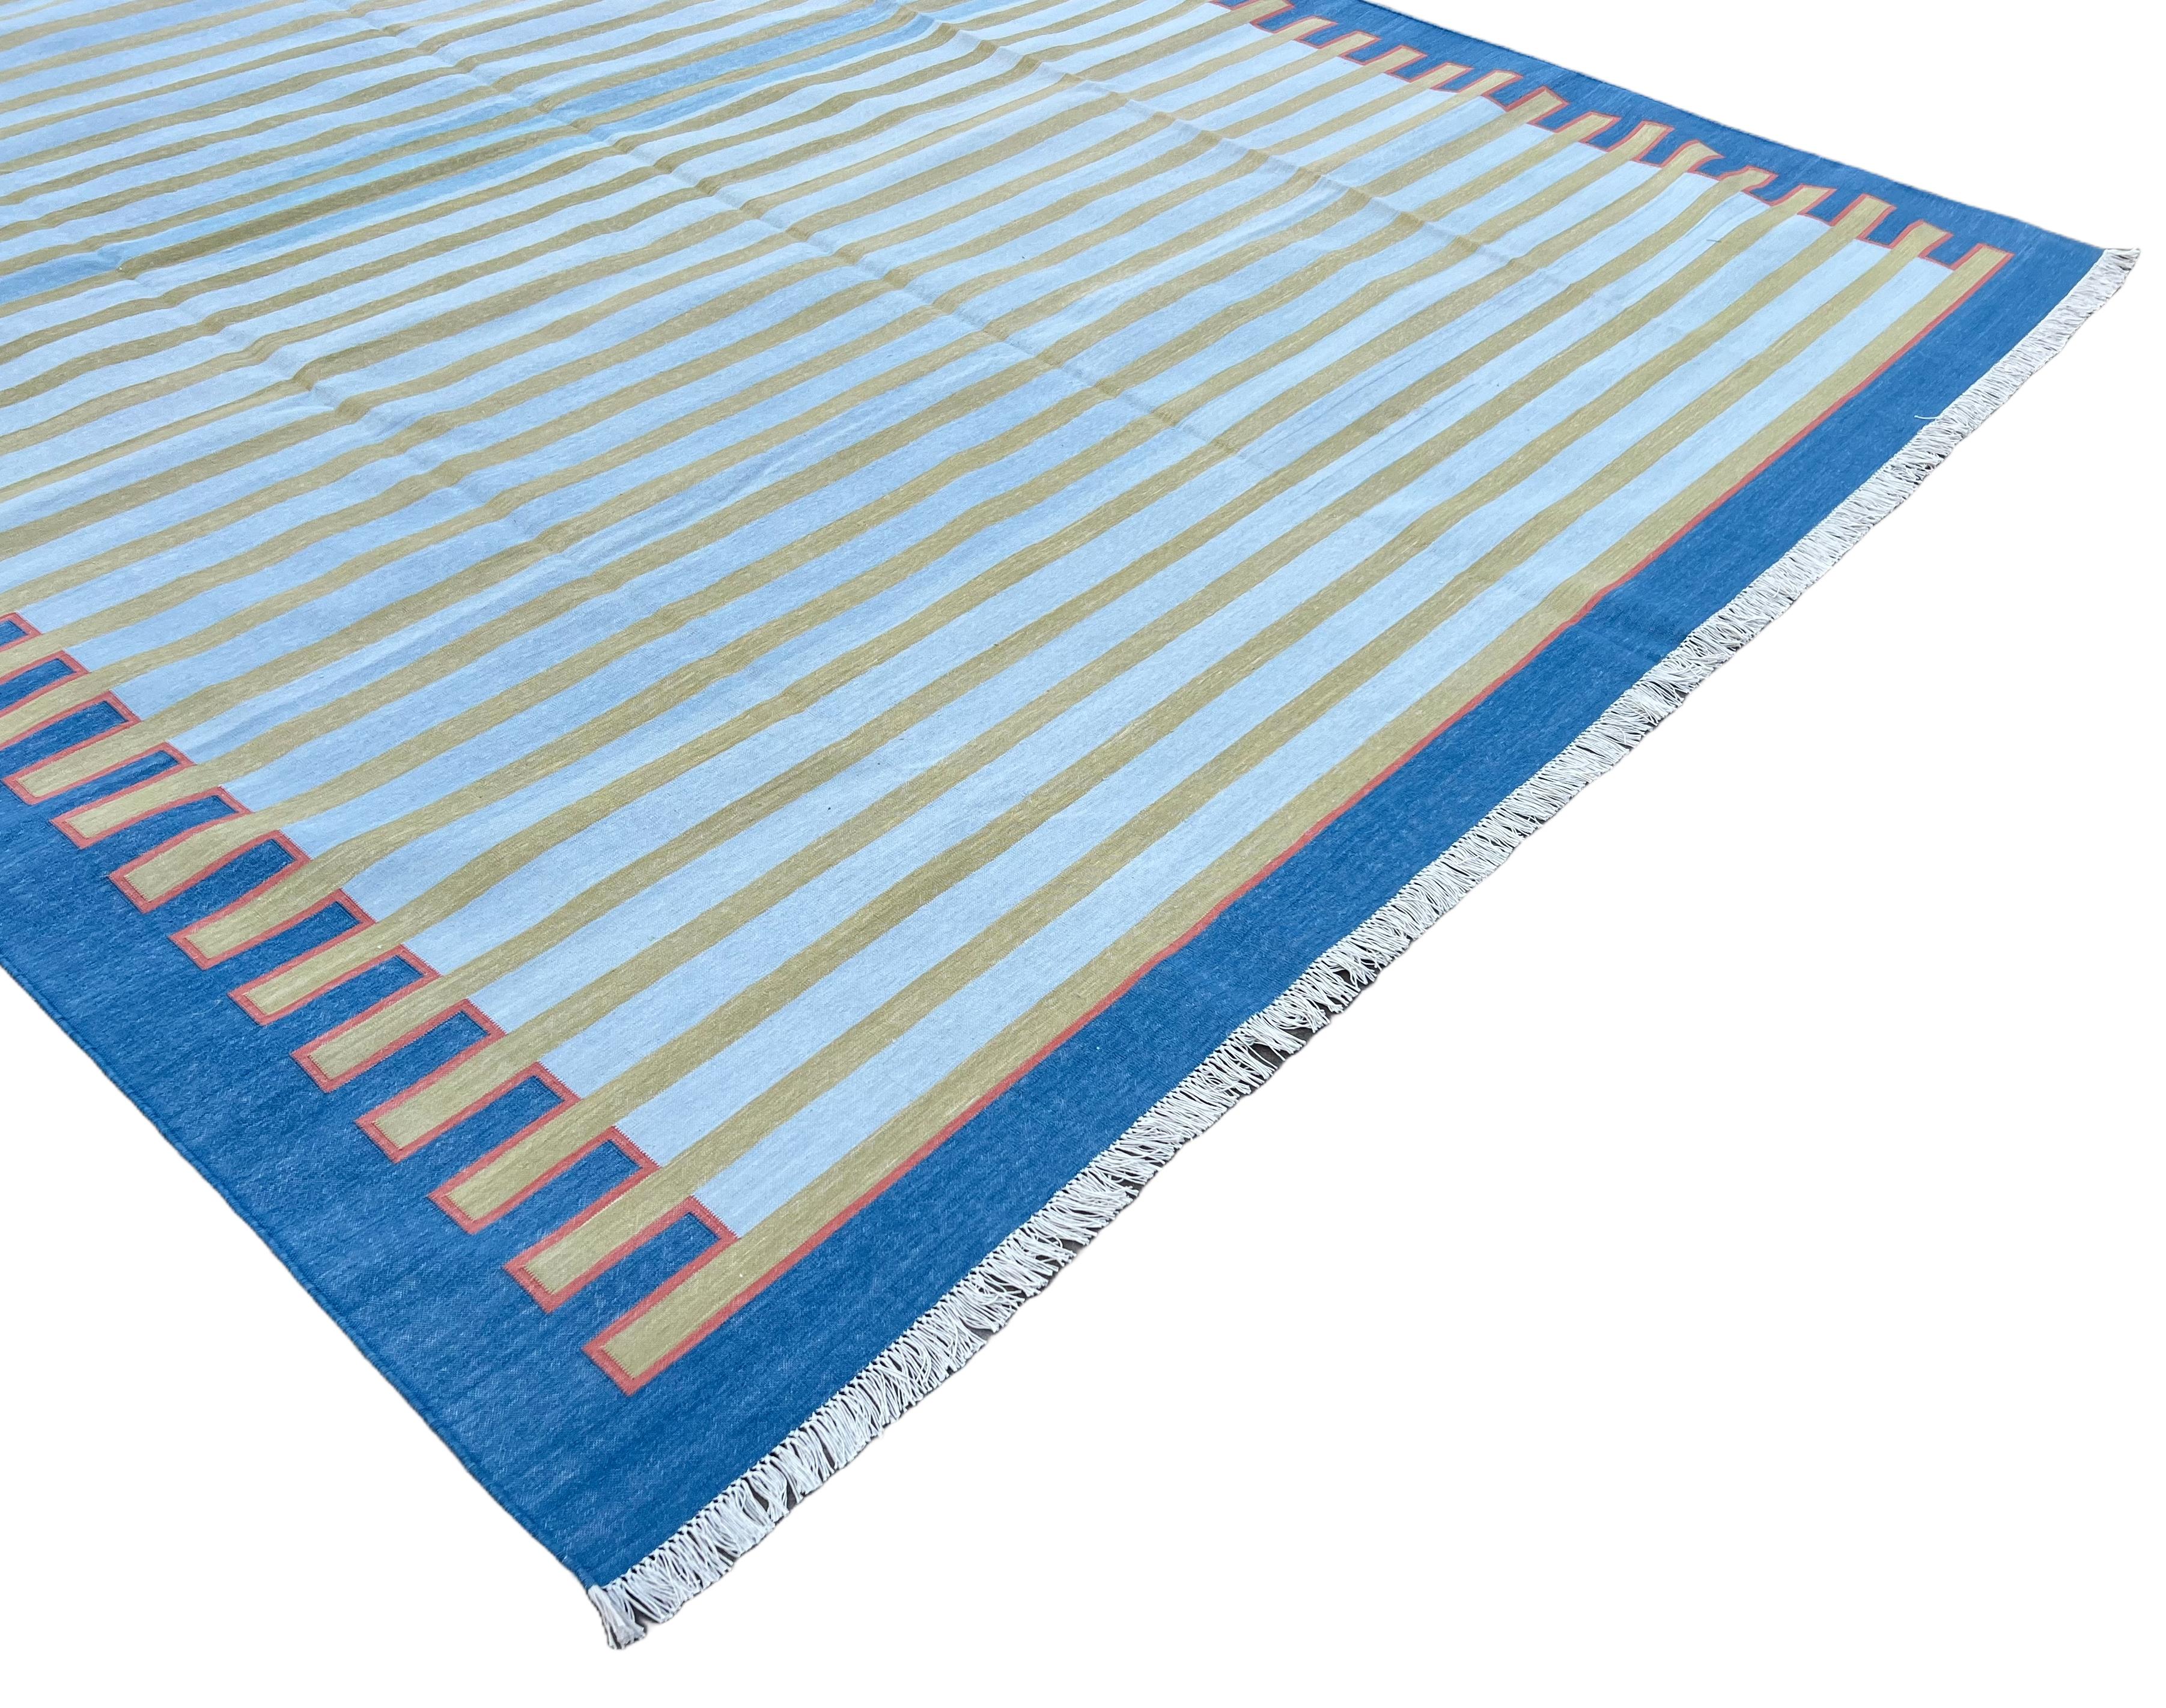 Handmade Cotton Area Flat Weave Rug, 9x12 Blue And Green Zig Zag Striped Dhurrie In New Condition For Sale In Jaipur, IN